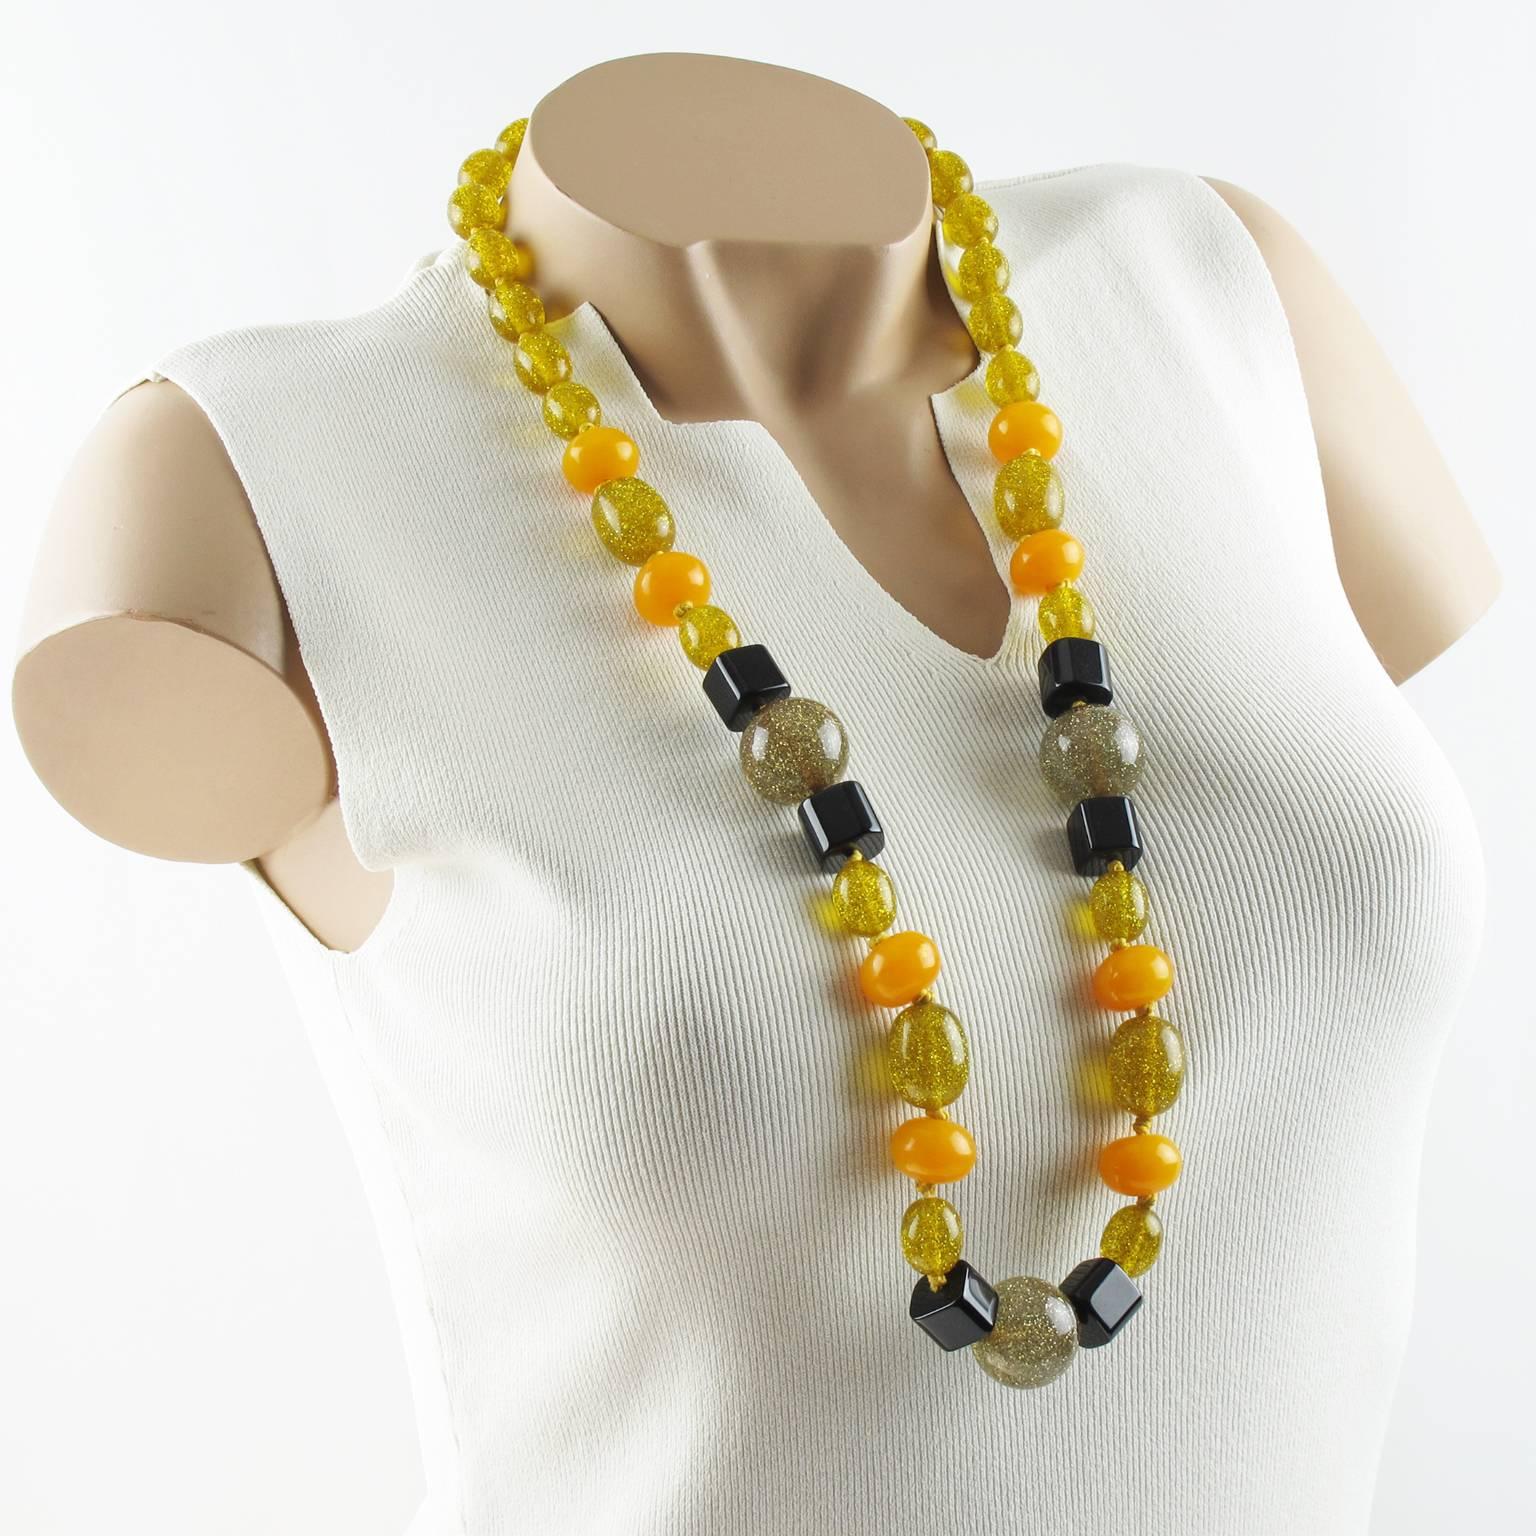 Extra long Bakelite and Lucite necklace. Assorted beads in various carved shape: round, olive, little square. Lovely mix and match of warm colors in assorted tones of black, orange tangerine, transparent gray and transparent yellow beads with